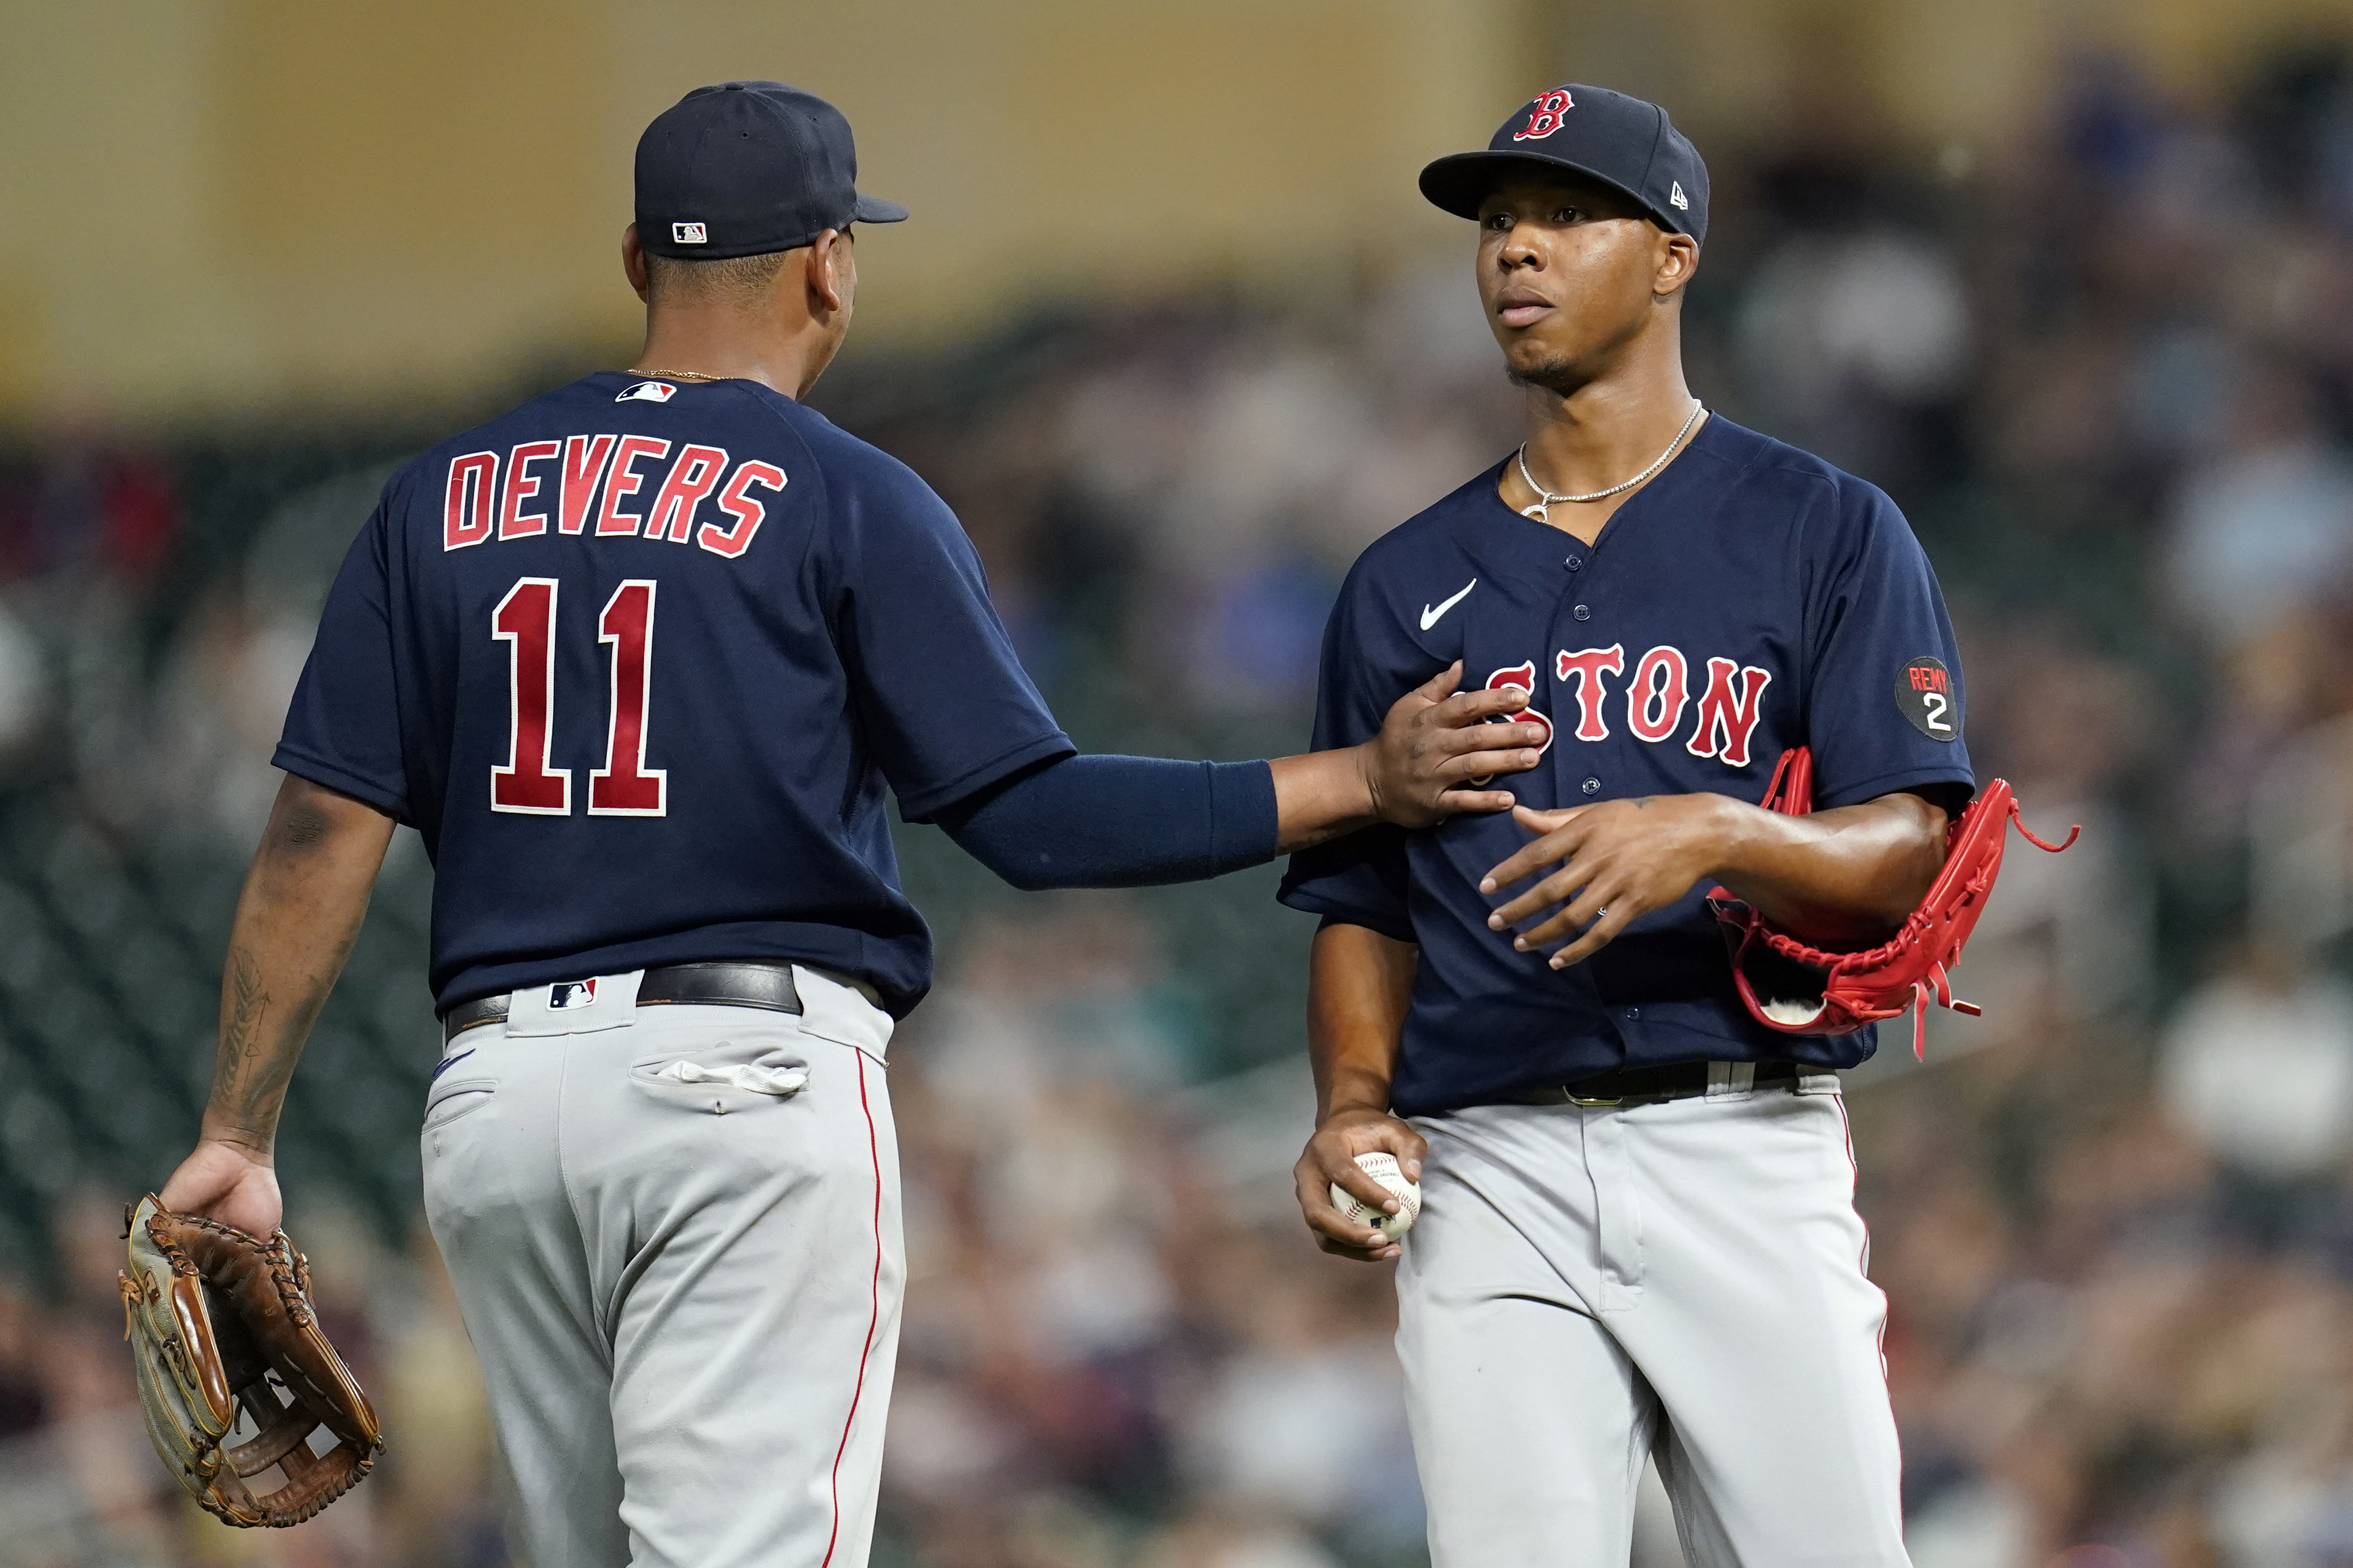 With hot Twins on deck, Red Sox are ready for a big test - The